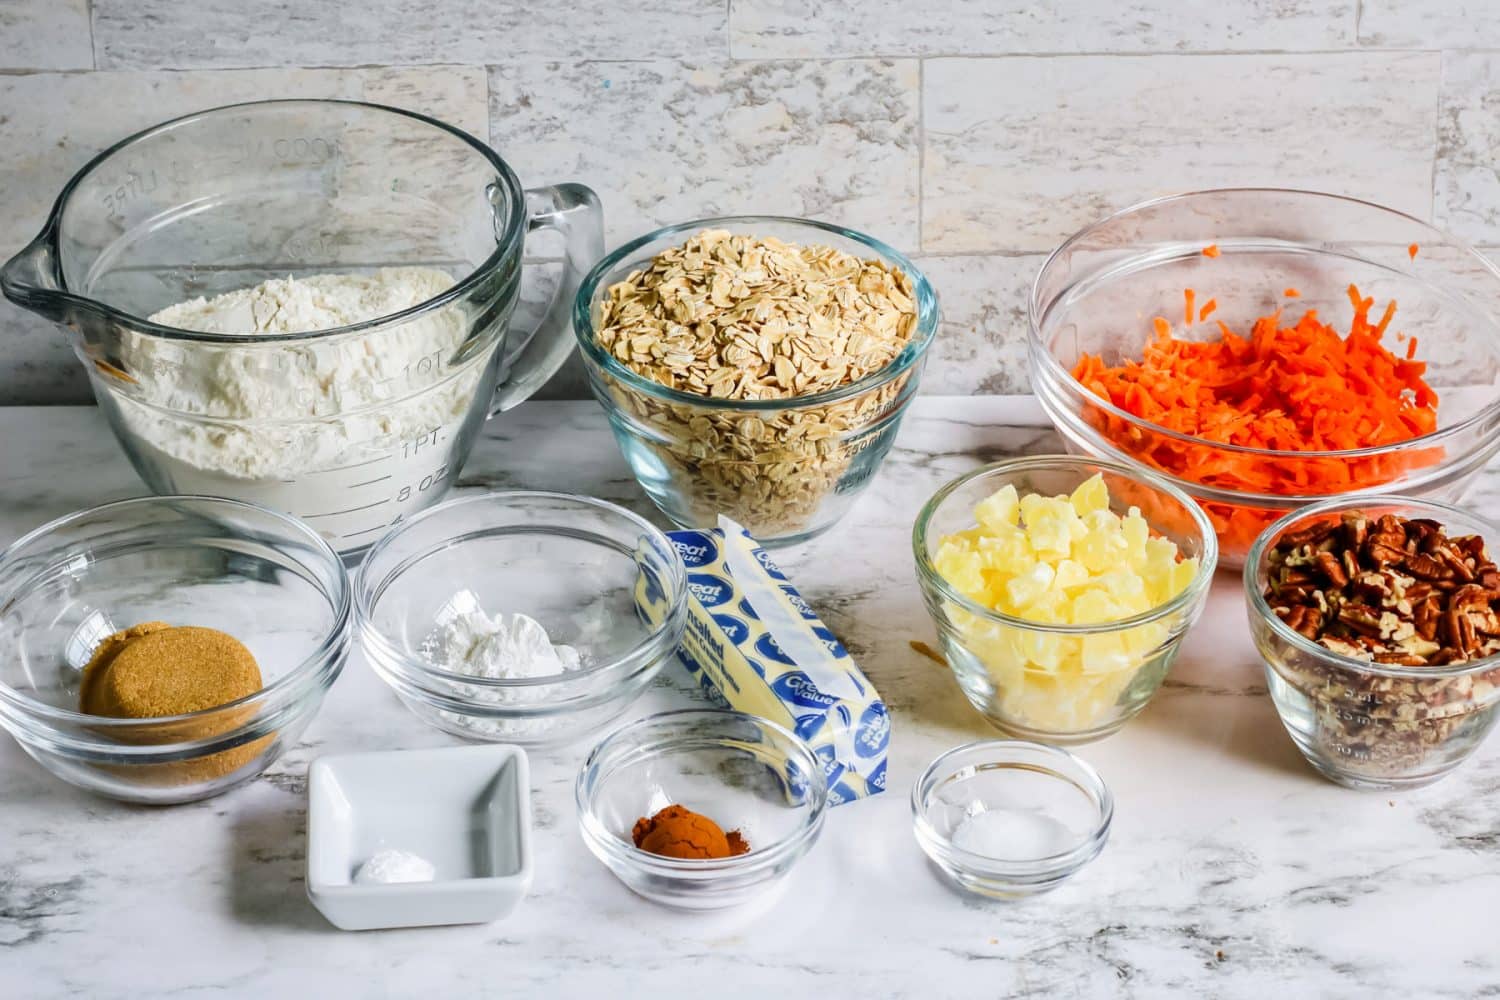 Ingredients for carrot cookies in bowls.